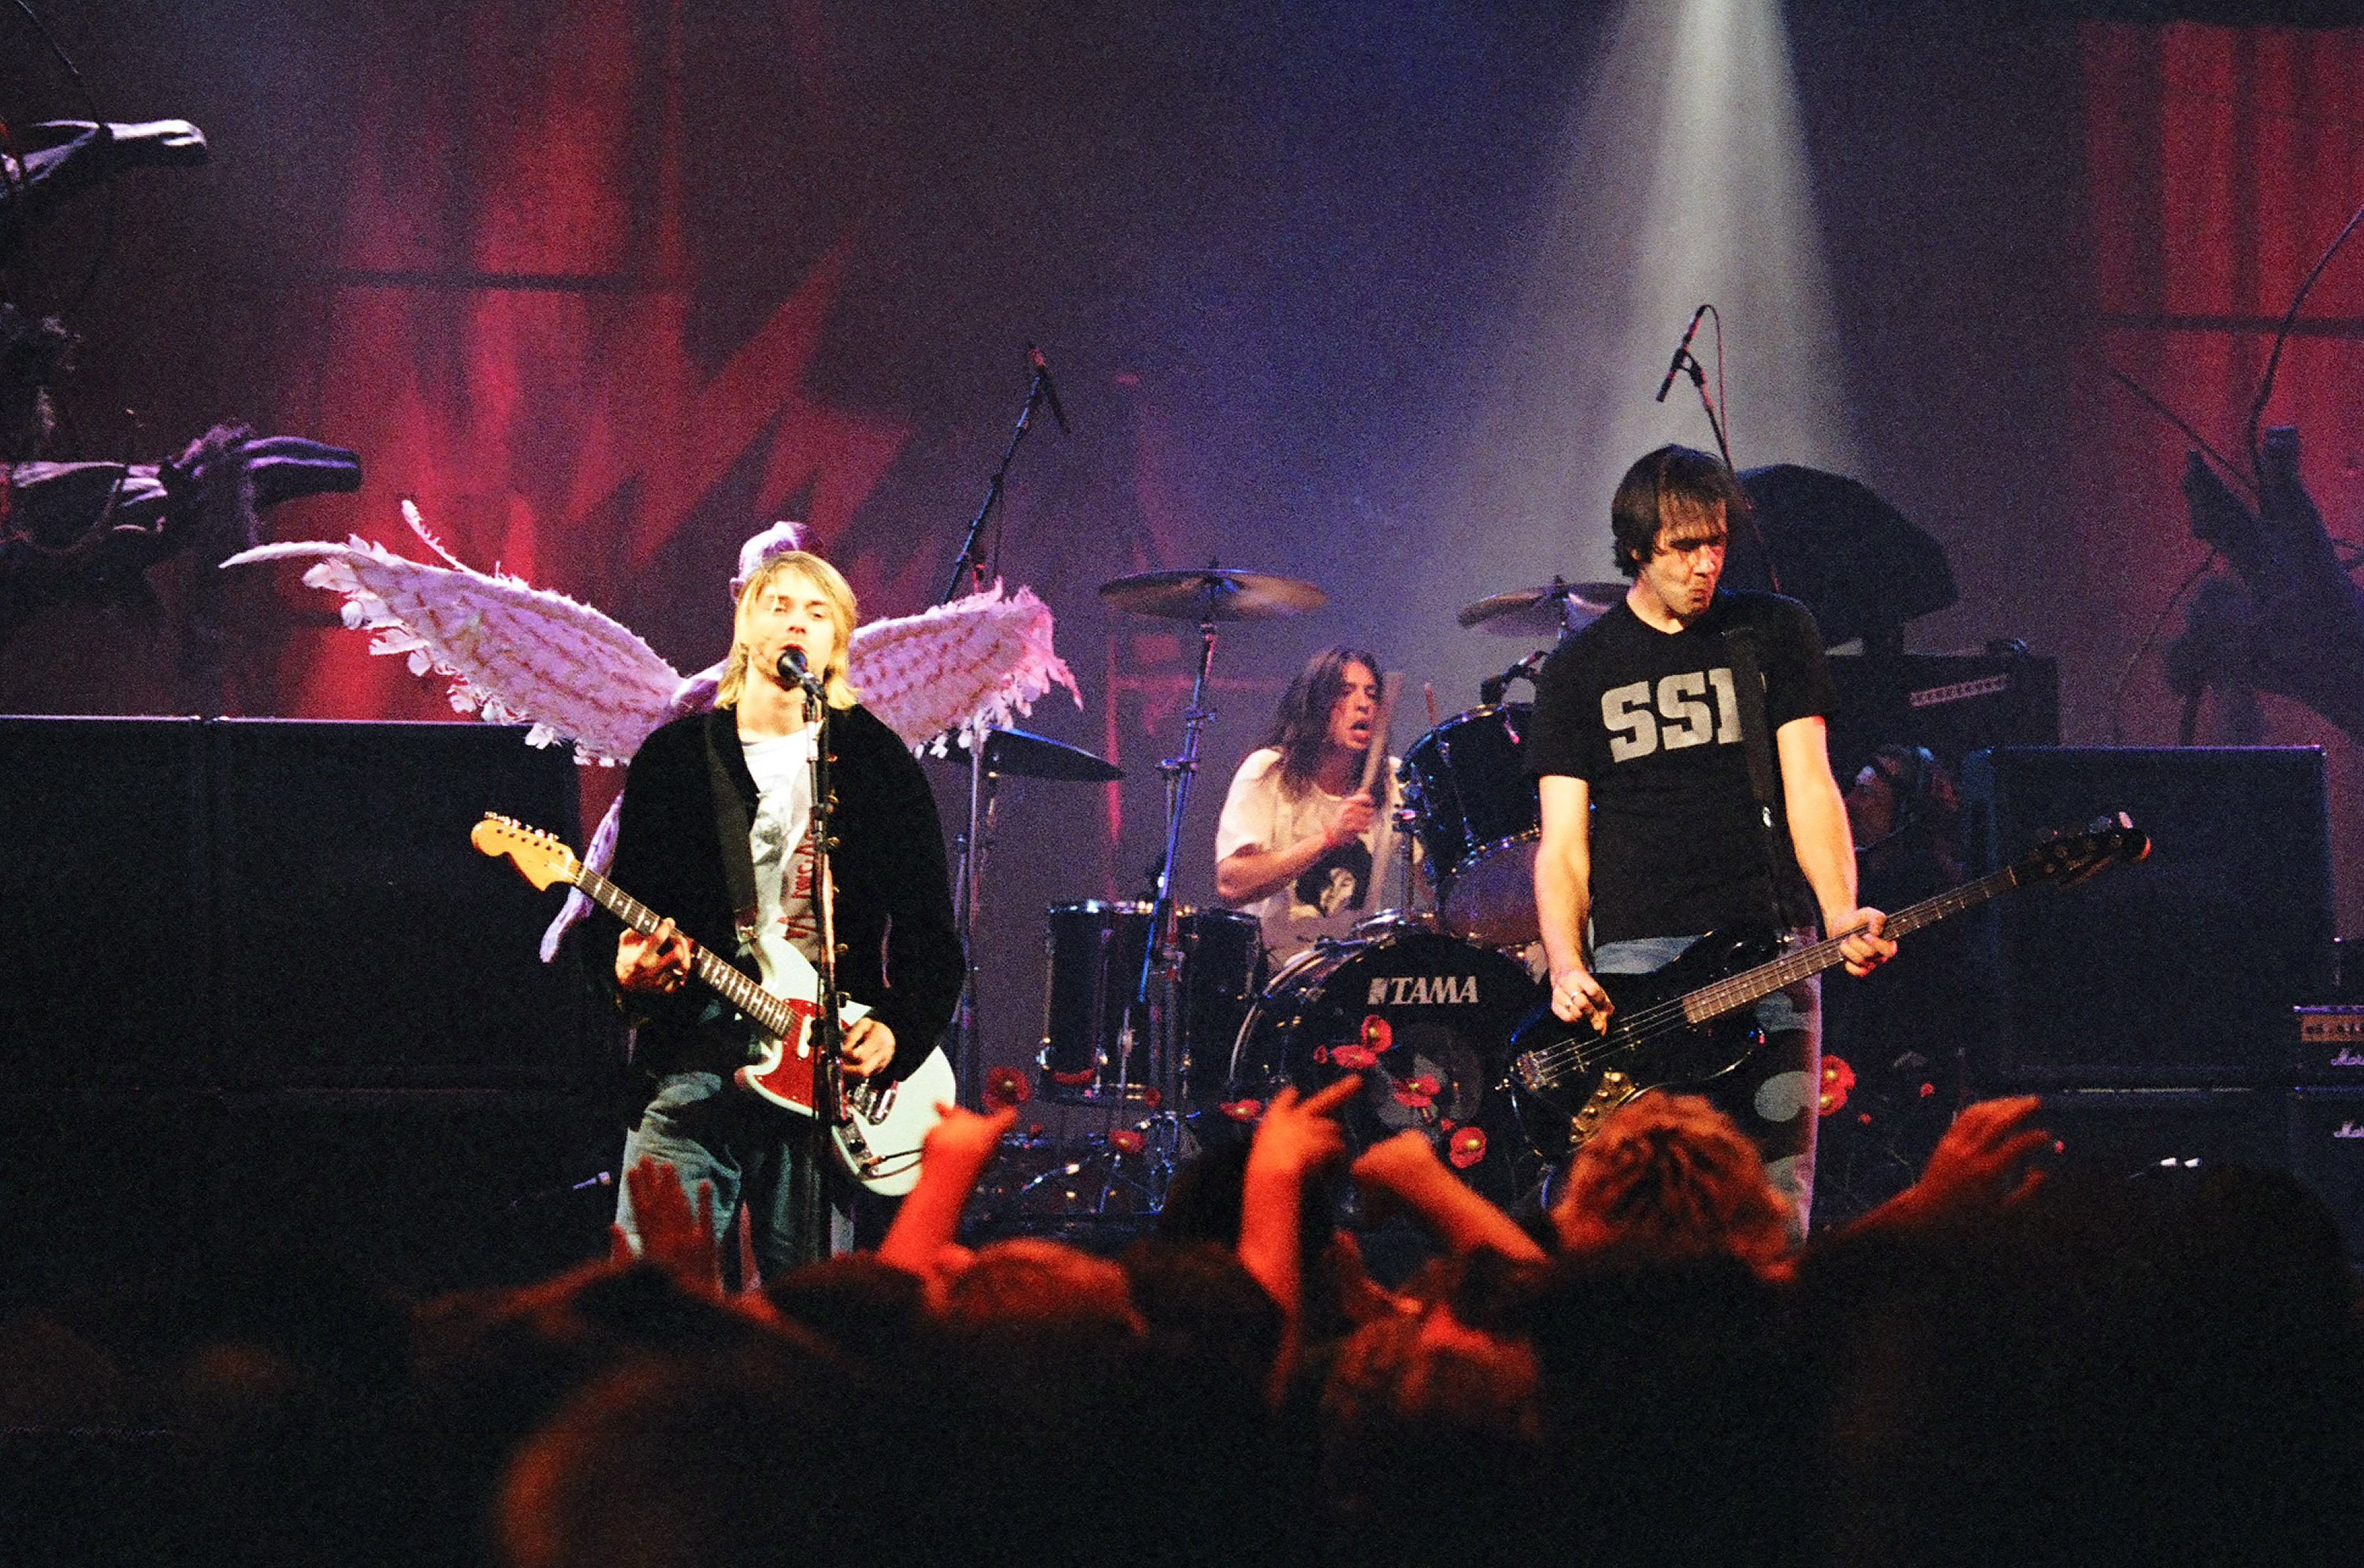 Pictured: Lead vocalist Kurt Cobain, Dave Grohl and Krist Novoselic of Nirvana perform live in December 1993 | Getty Images